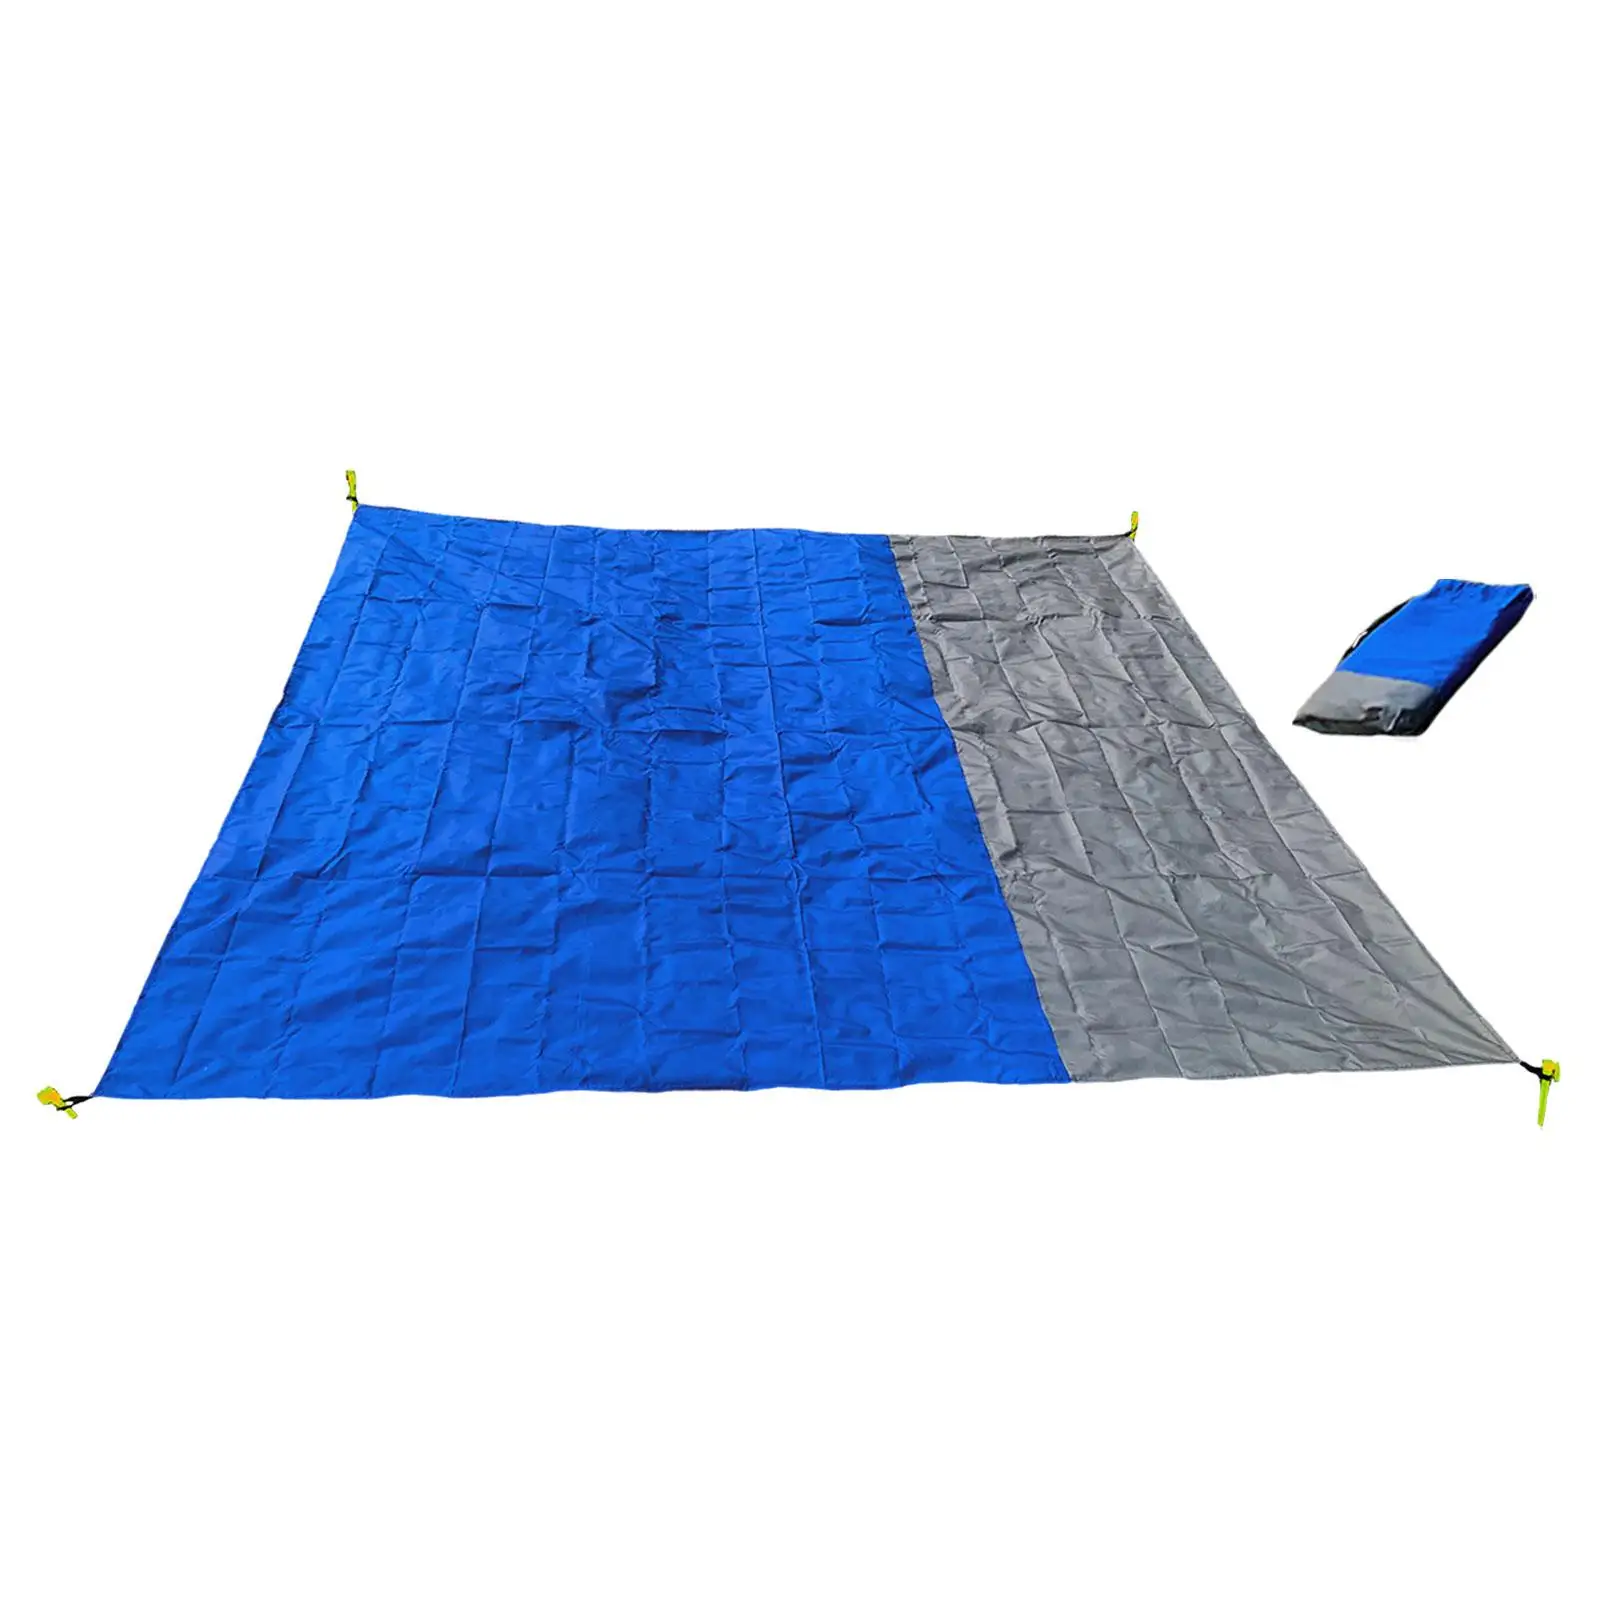 Picnic Blanket Outdoor Mat Folding Compact Beach Mat Accessory Camping Mat for Park Travel Backpacking Sports Music Festival